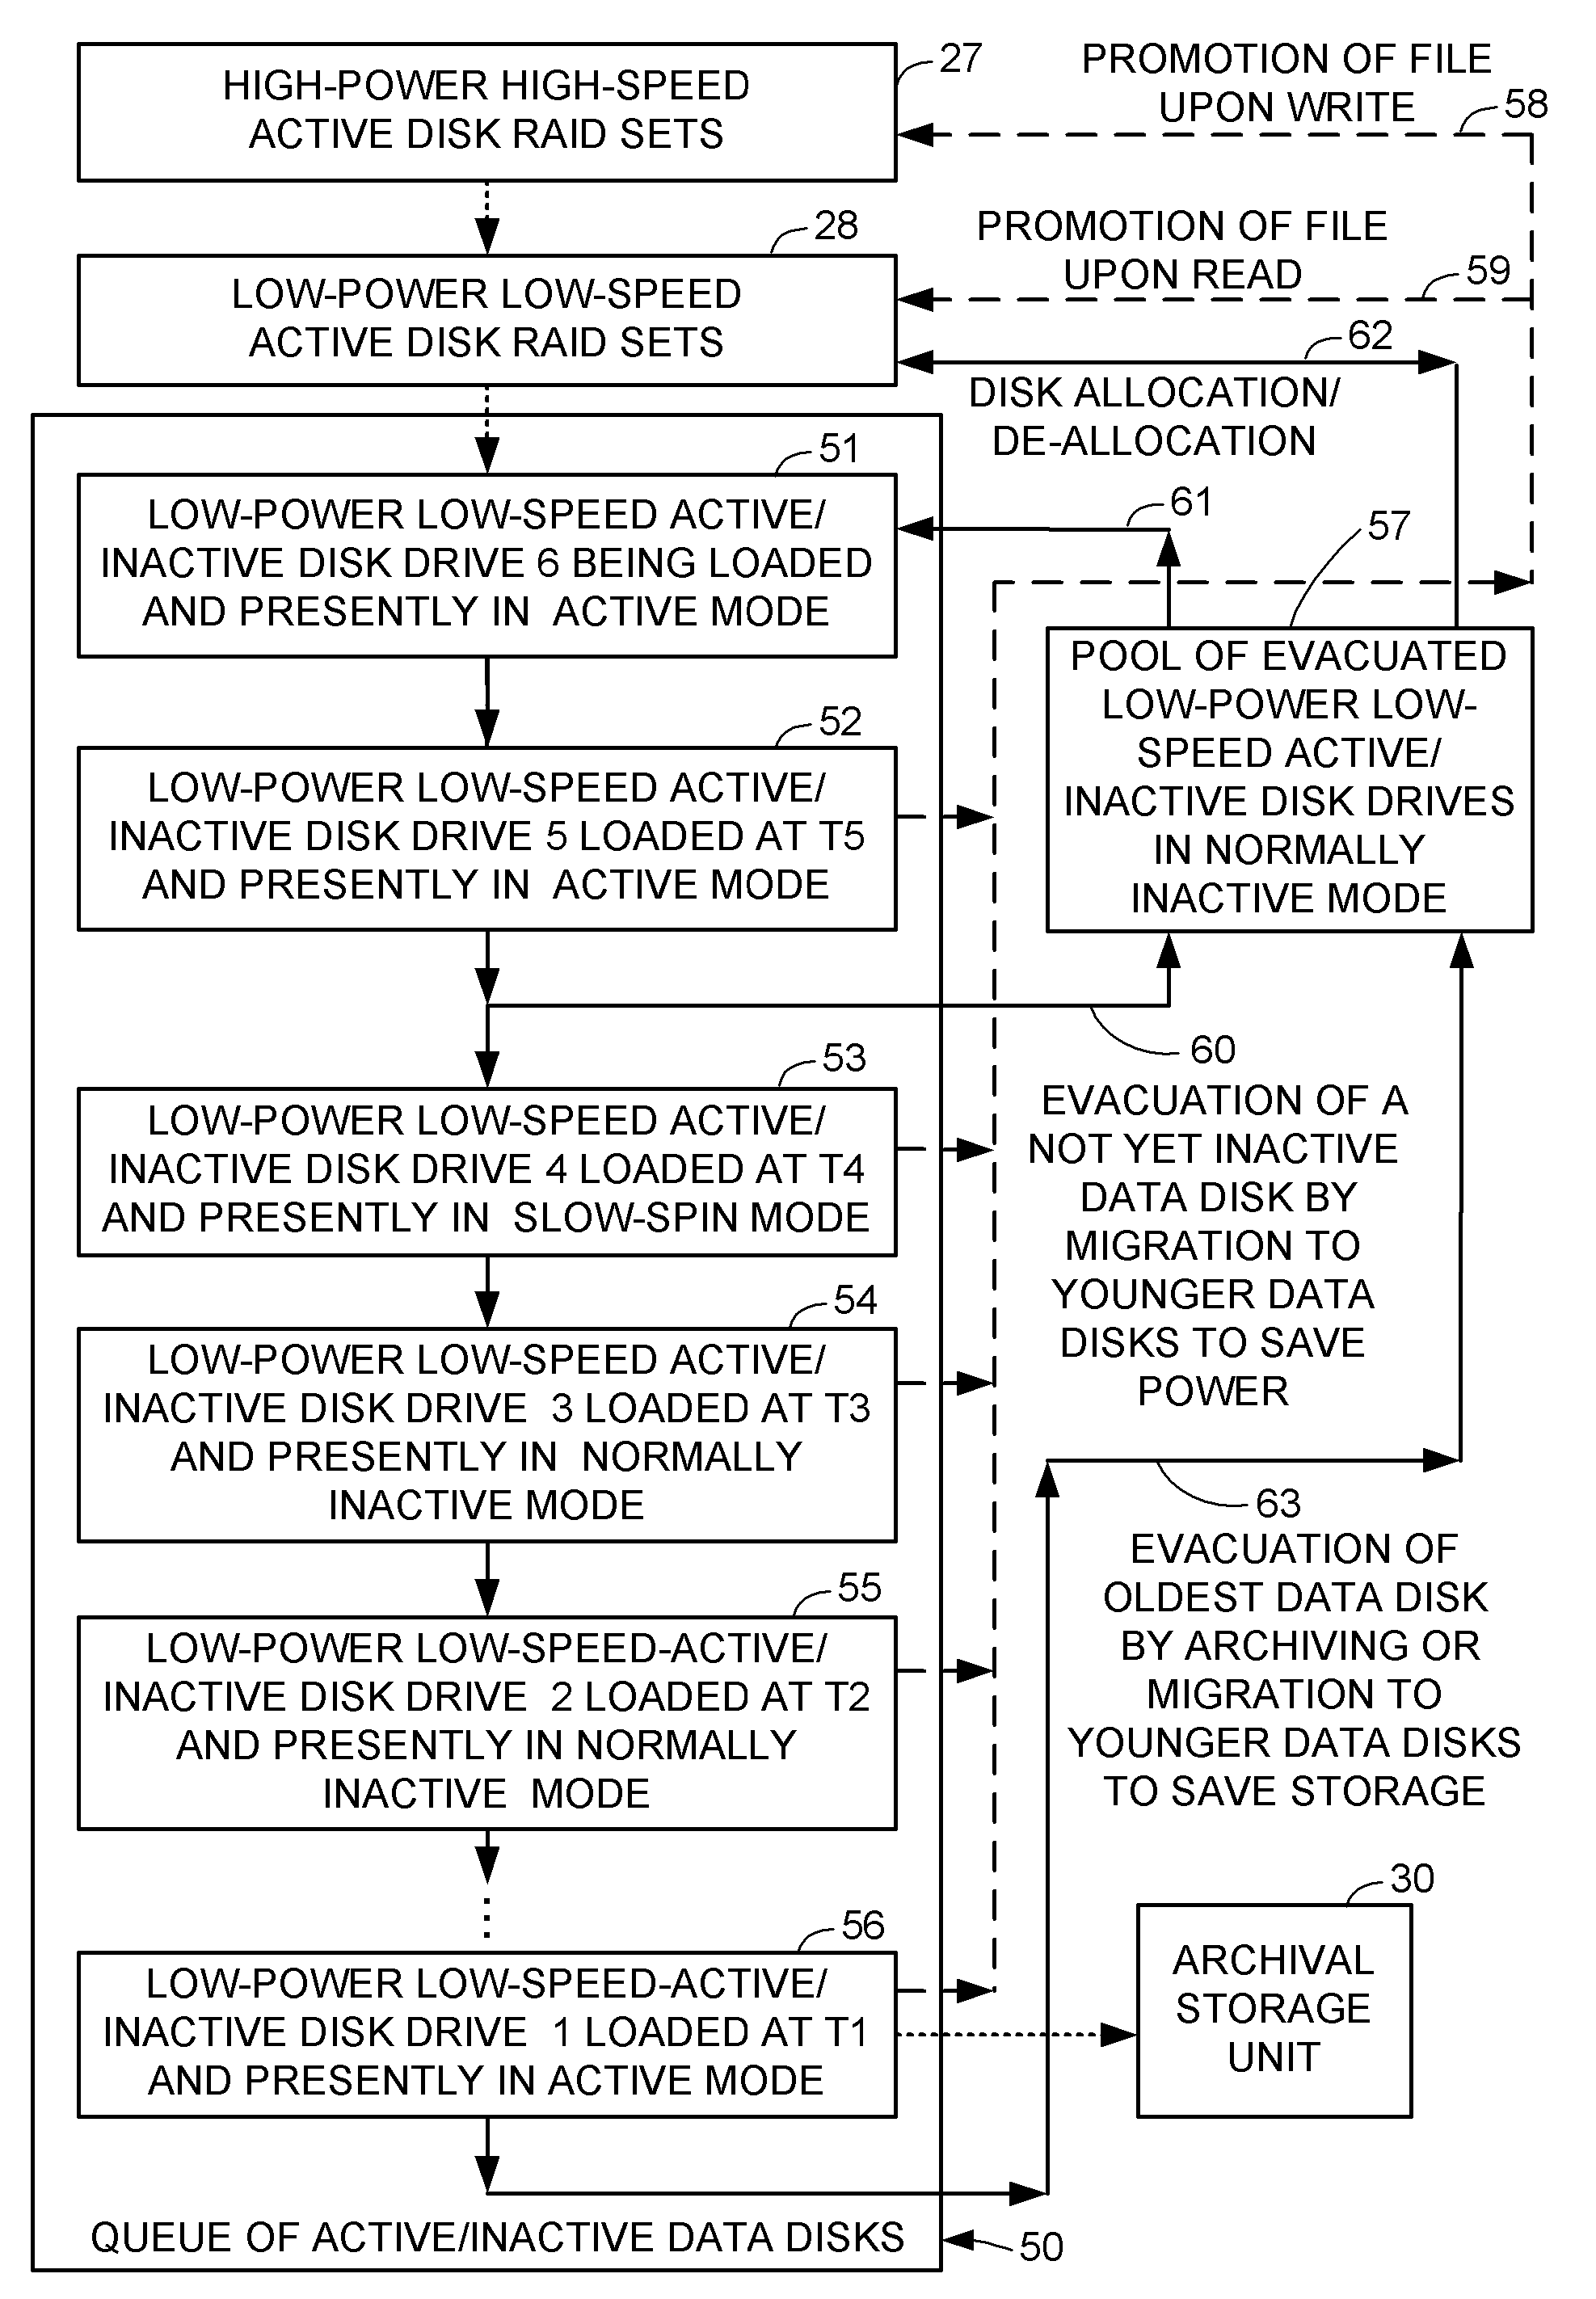 Intelligent file system based power management for shared storage that migrates groups of files based on inactivity threshold